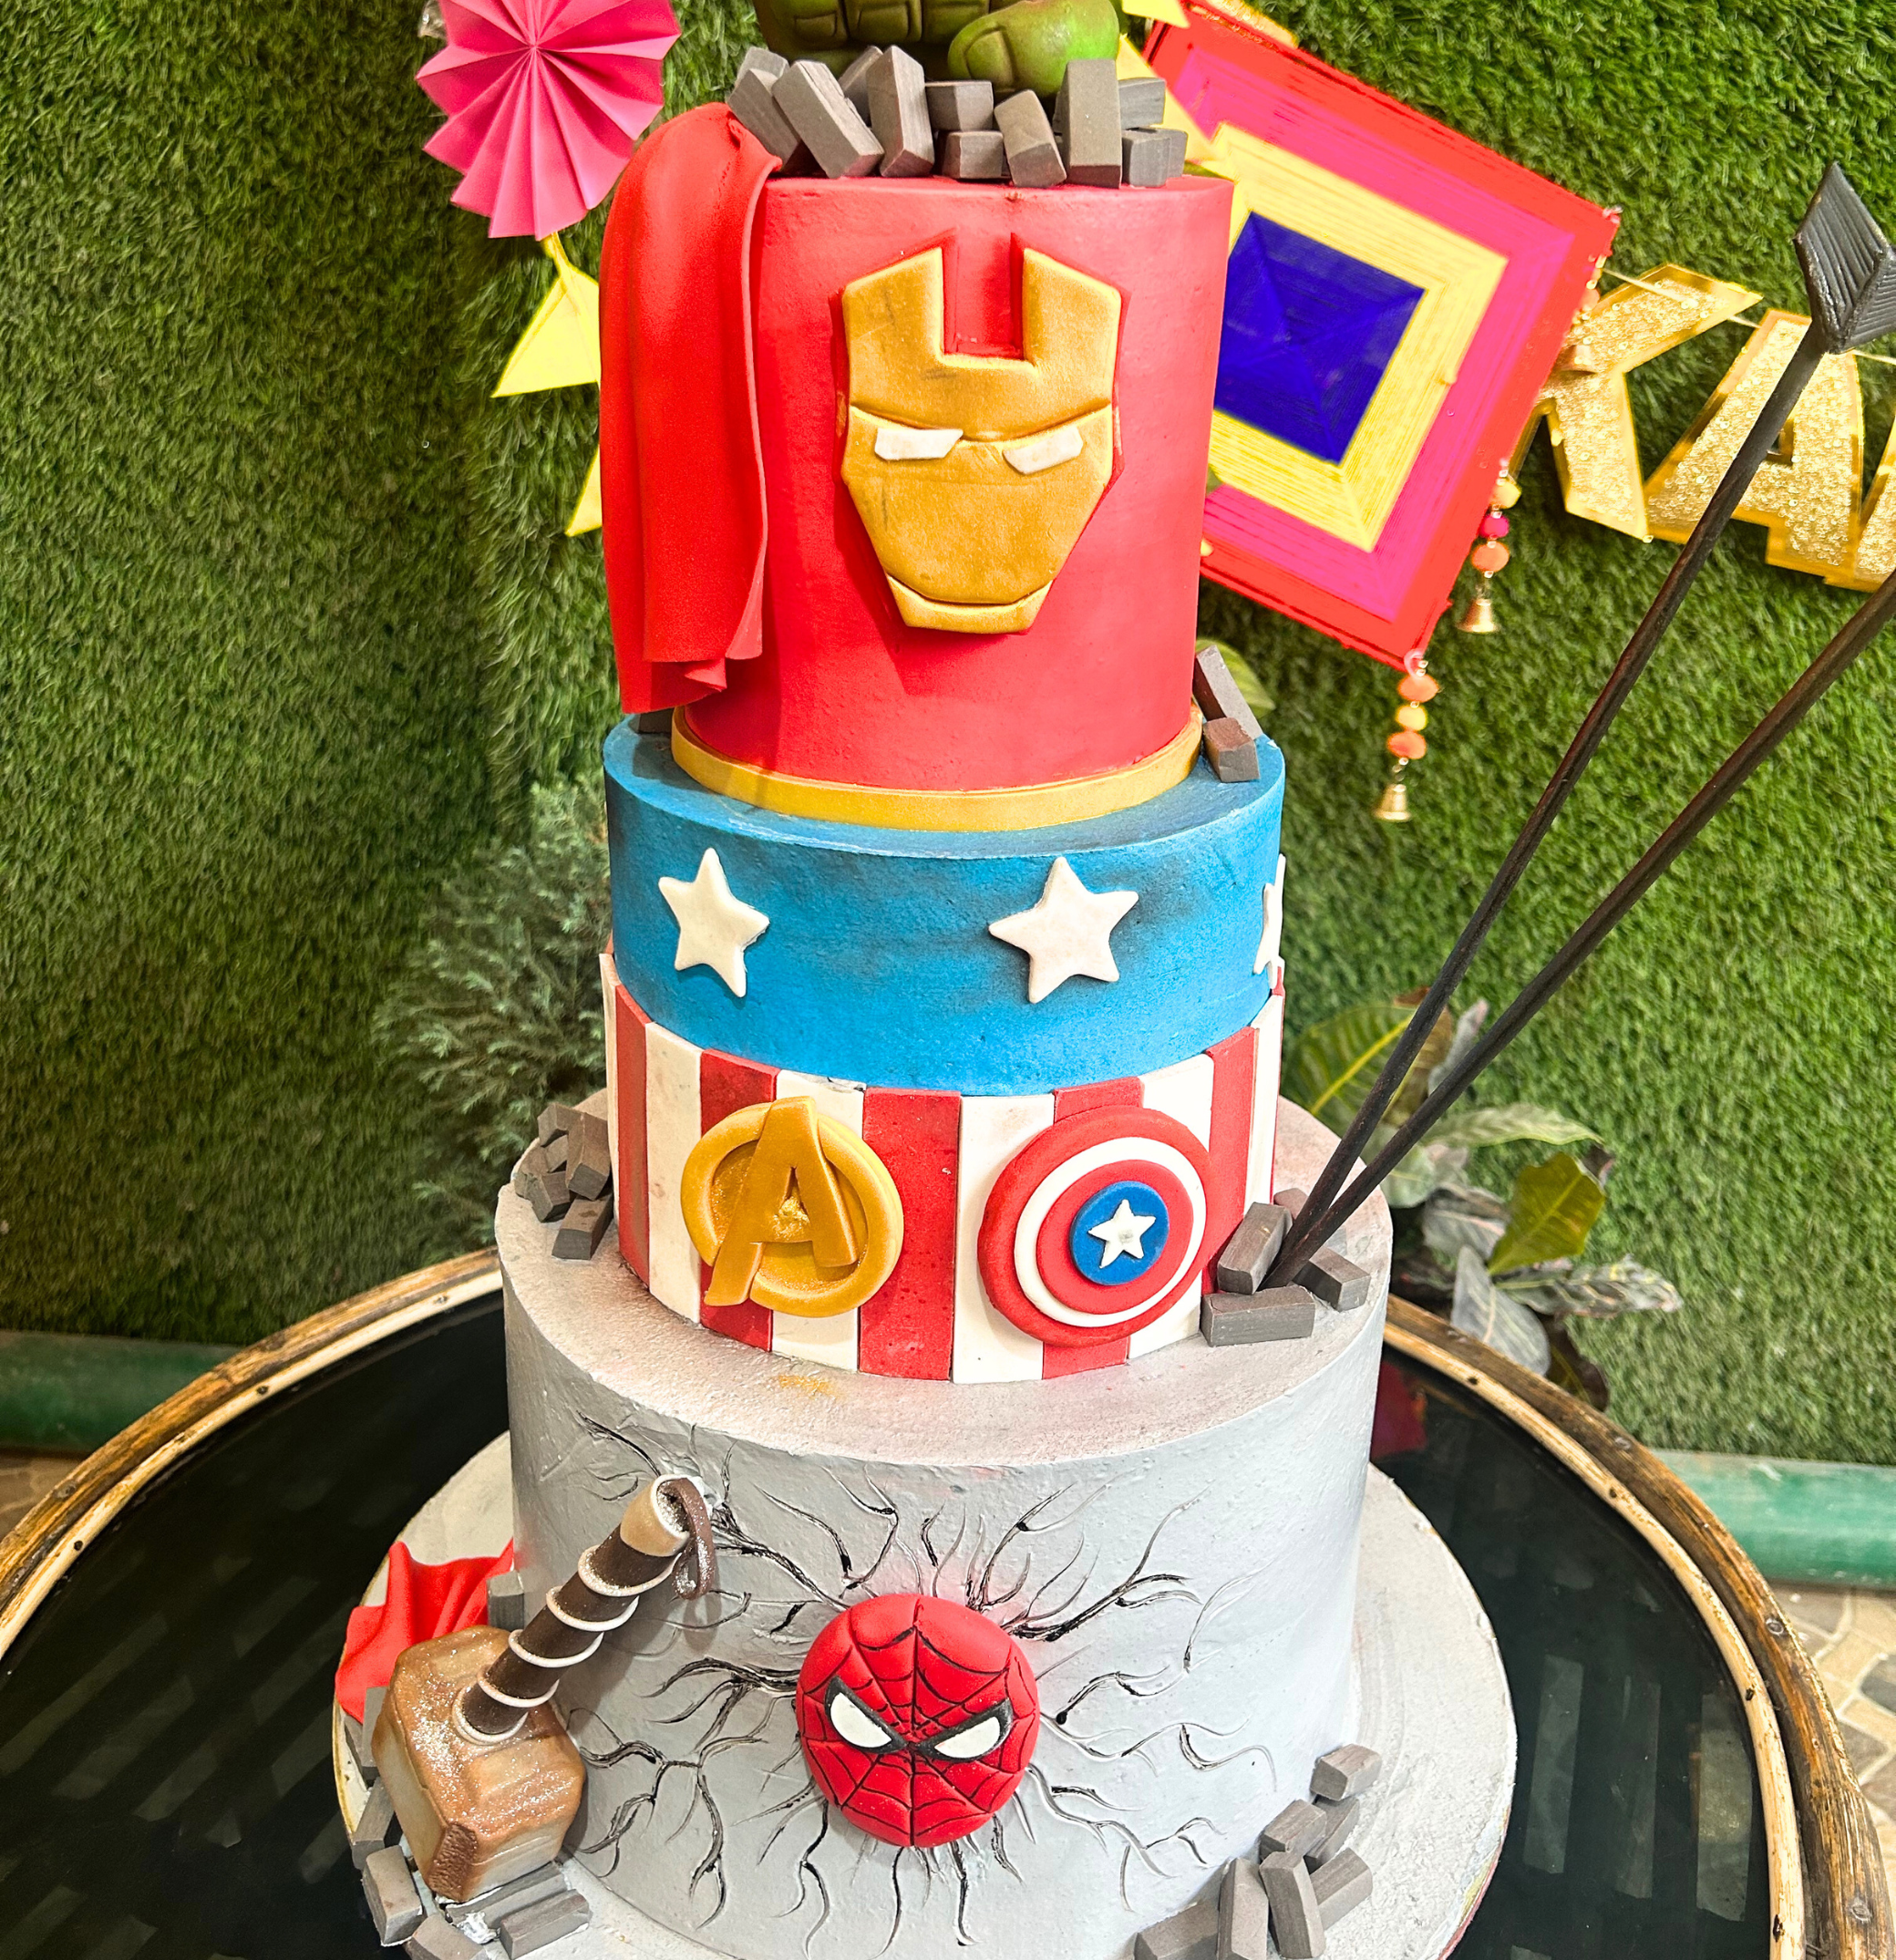 Order Bday Cakes for Superhero Themed Parties | Gurgaon Bakers